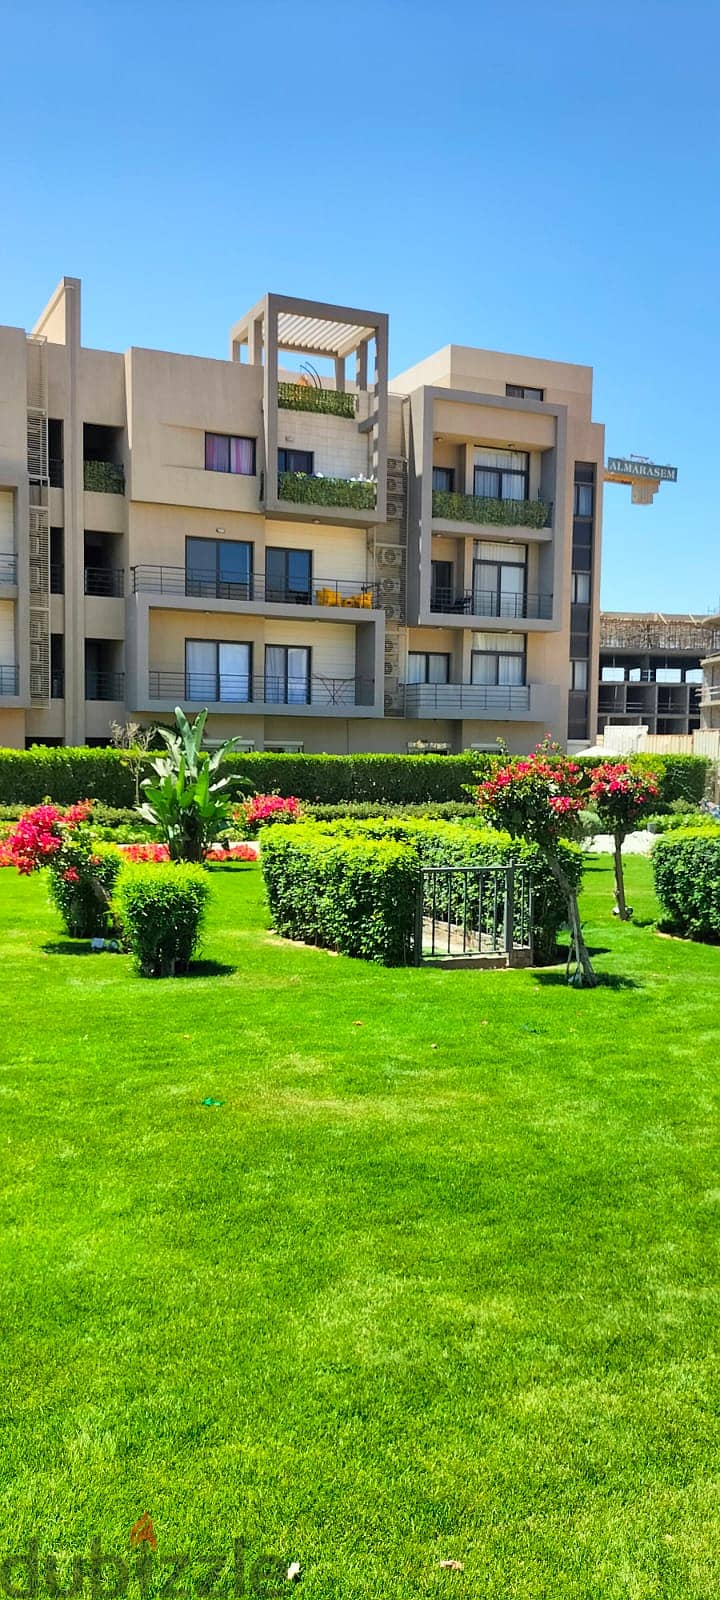 Apartment for sale with private garden, fully finished, with air conditioners and ready to move with an open view and landscape 5